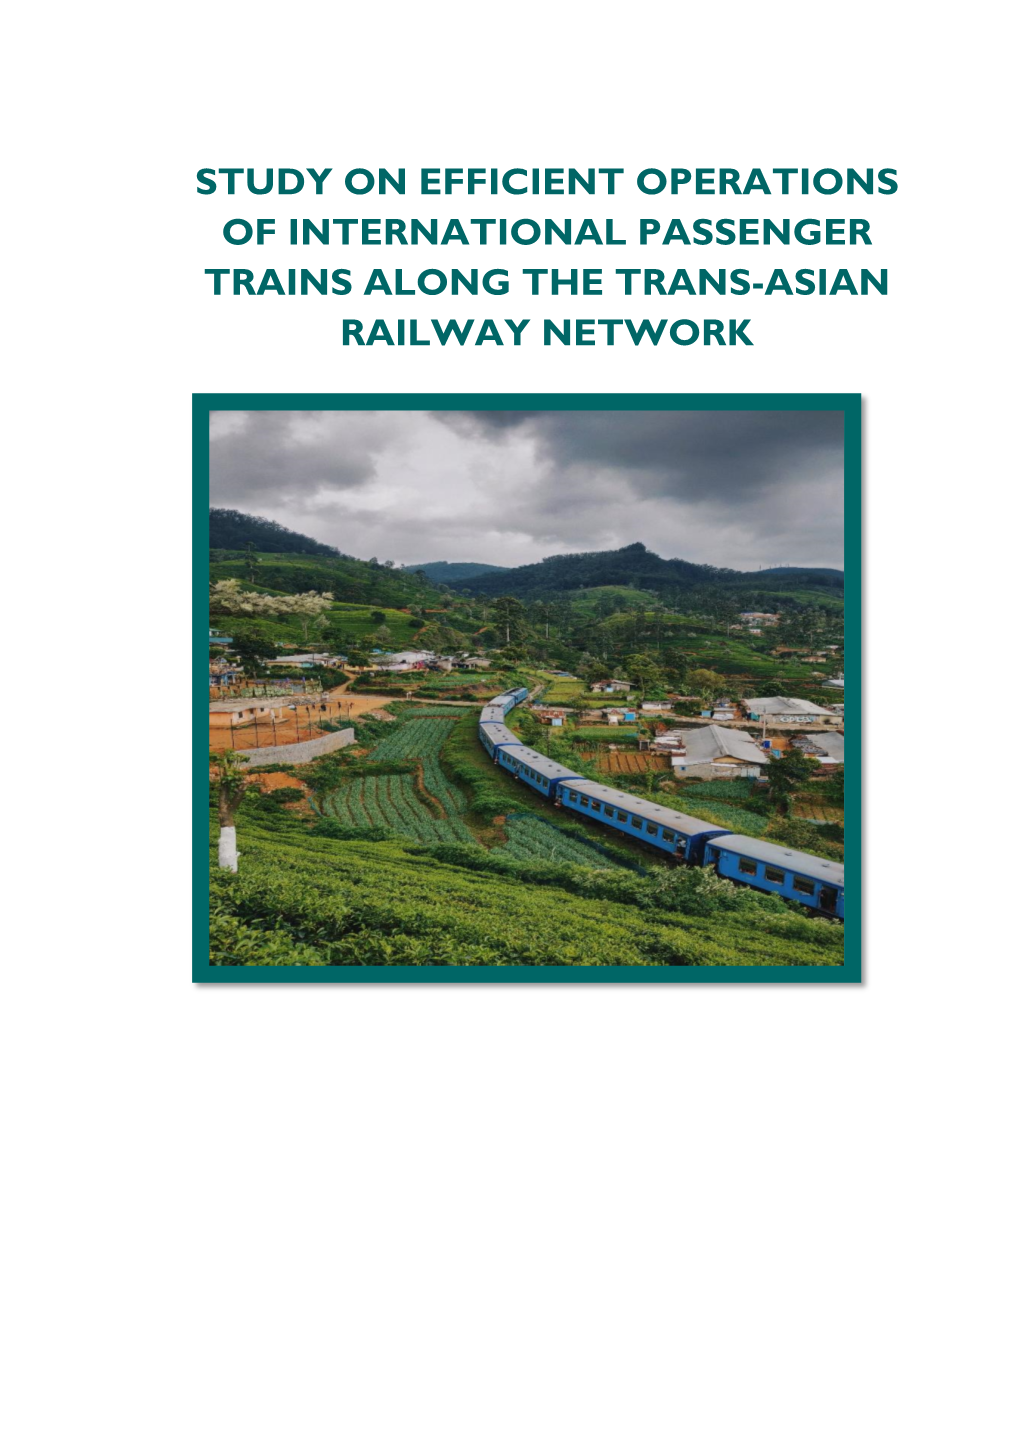 Study on Efficient Operations of International Passenger Trains Along the Trans-Asian Railway Network